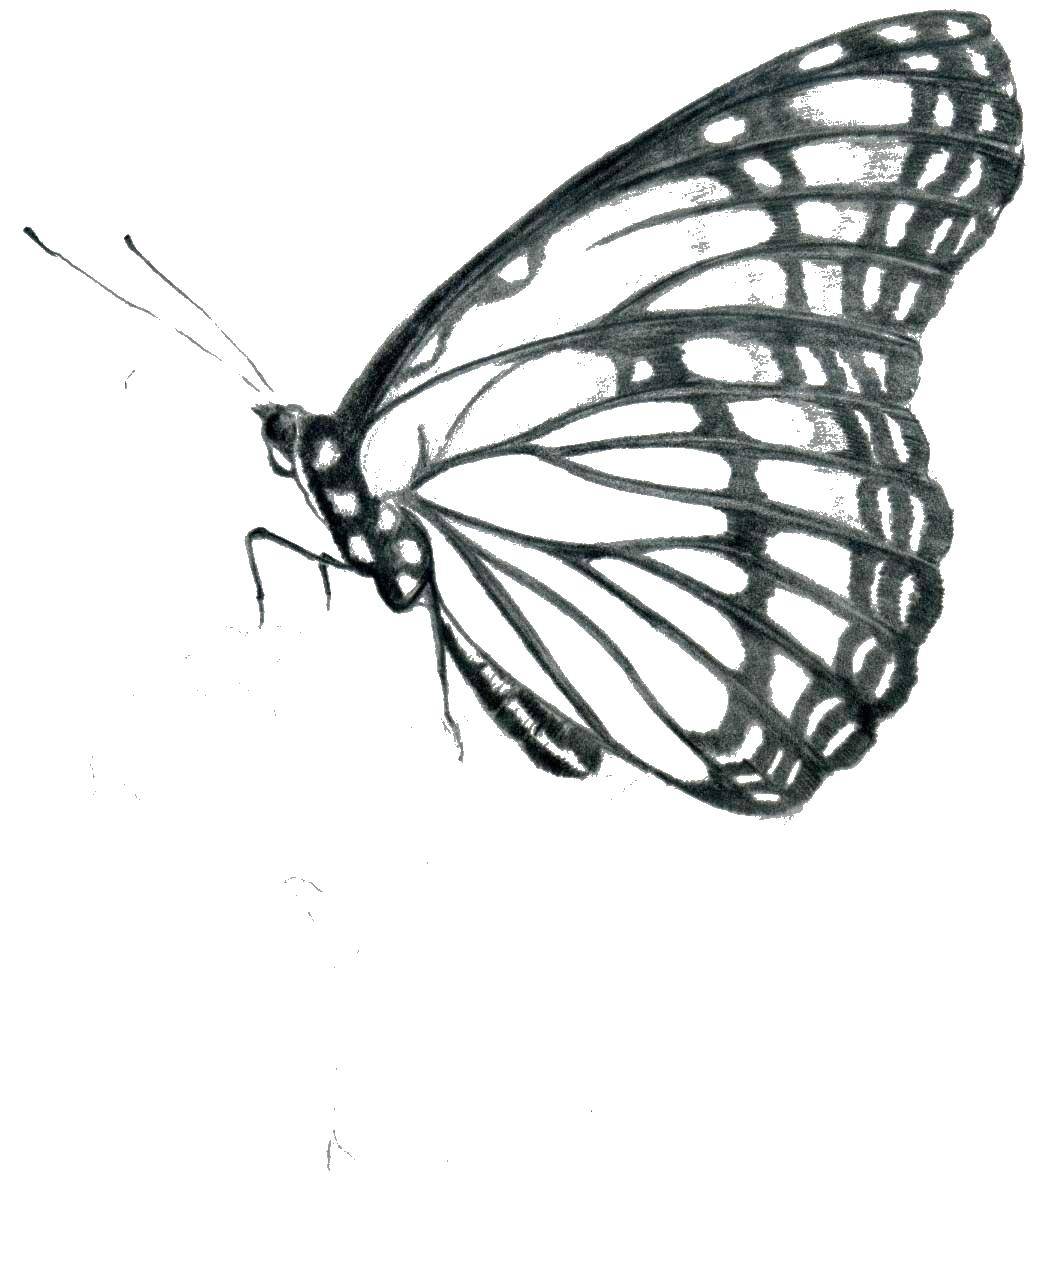 Coloring Butterfly. Category butterfly. Tags:  butterfly.